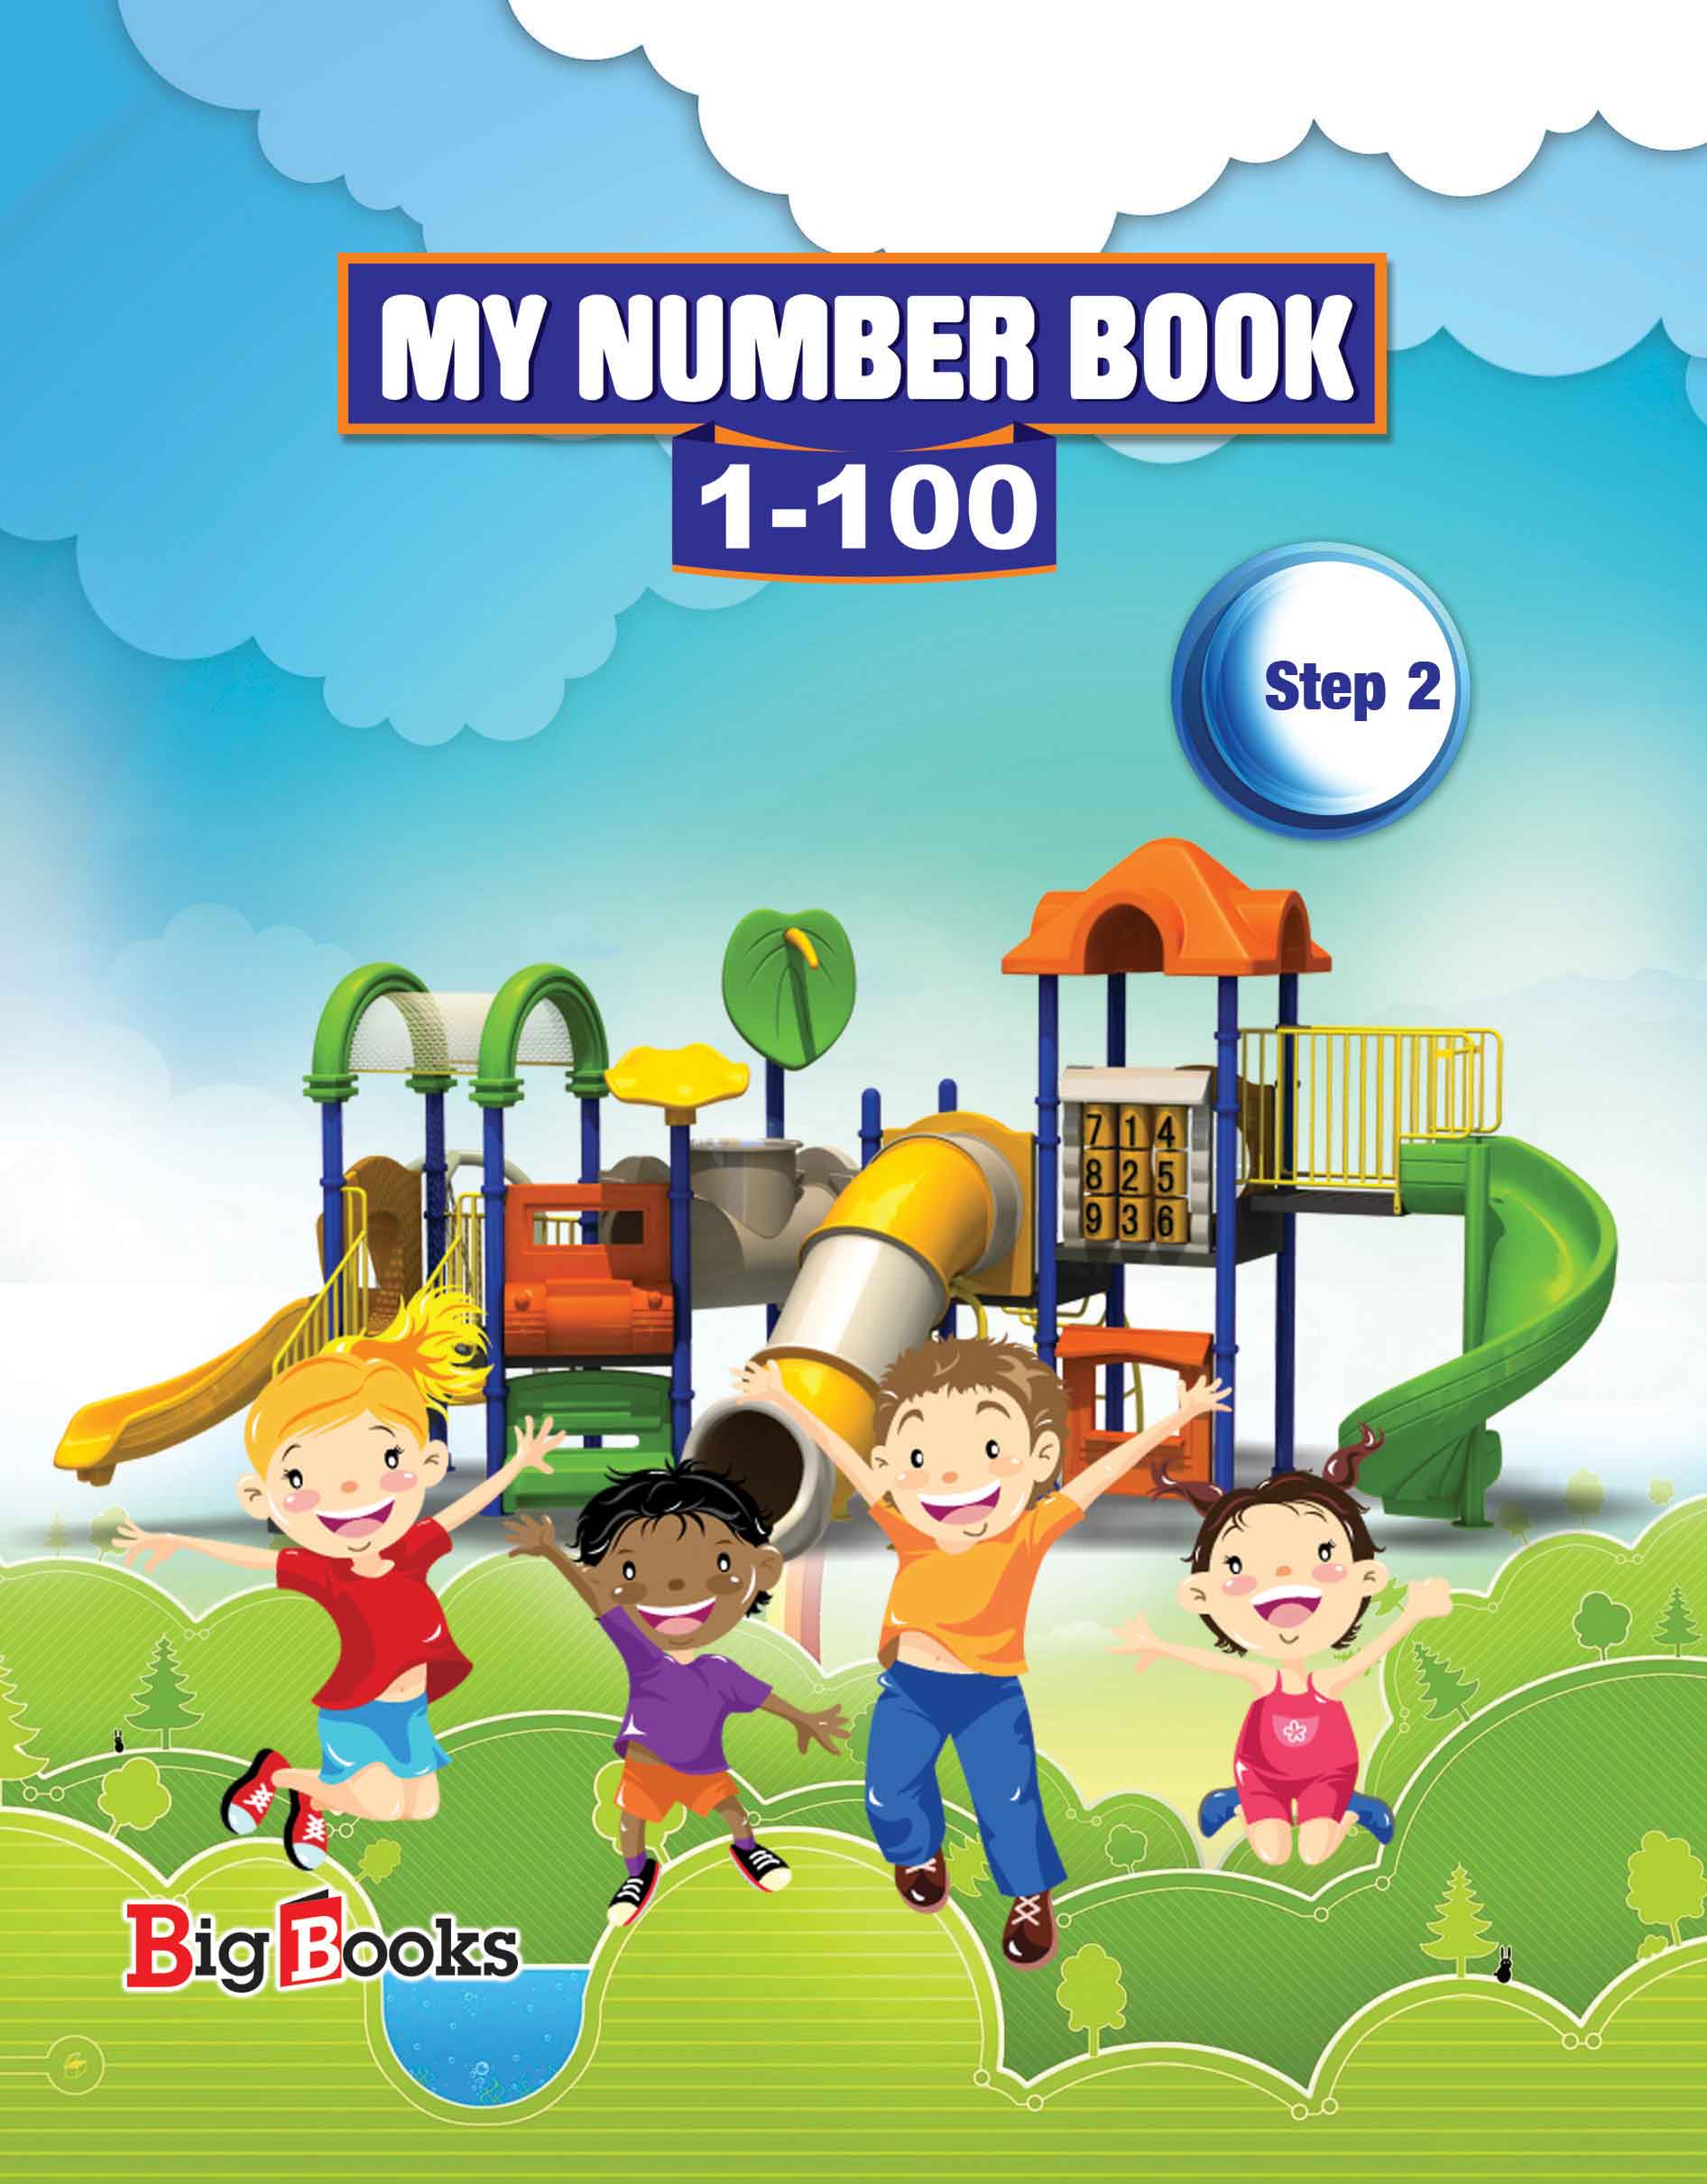 Buy English Number Book online